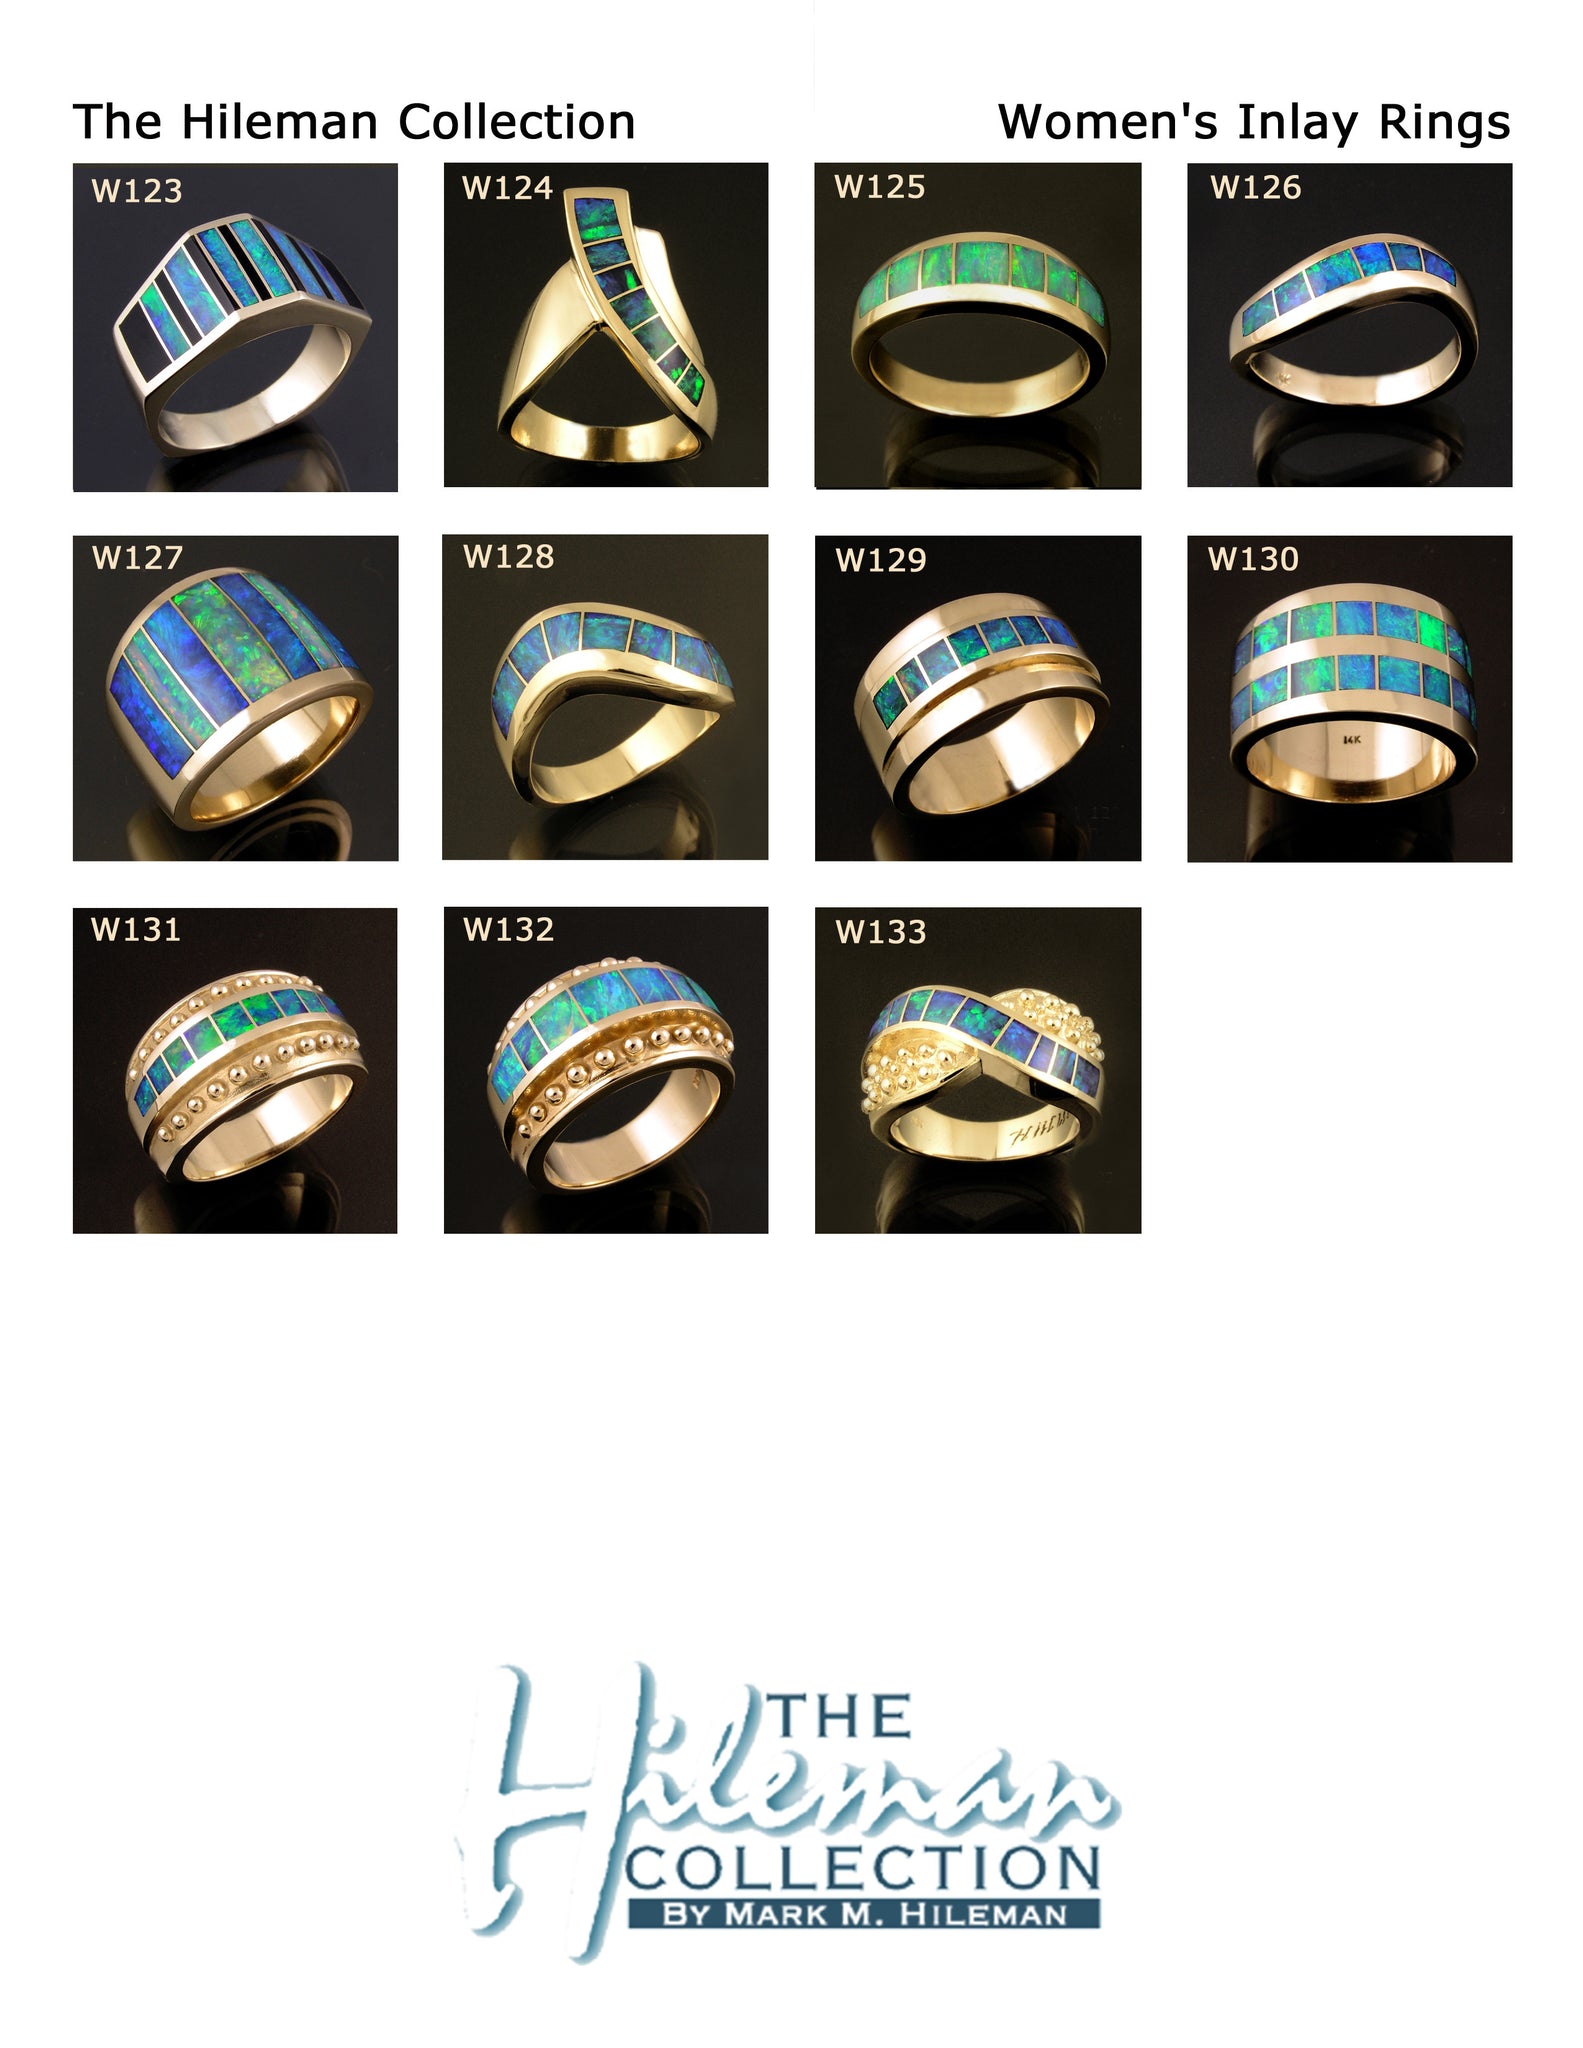 Australian opal rings for women by The Hileman Collection